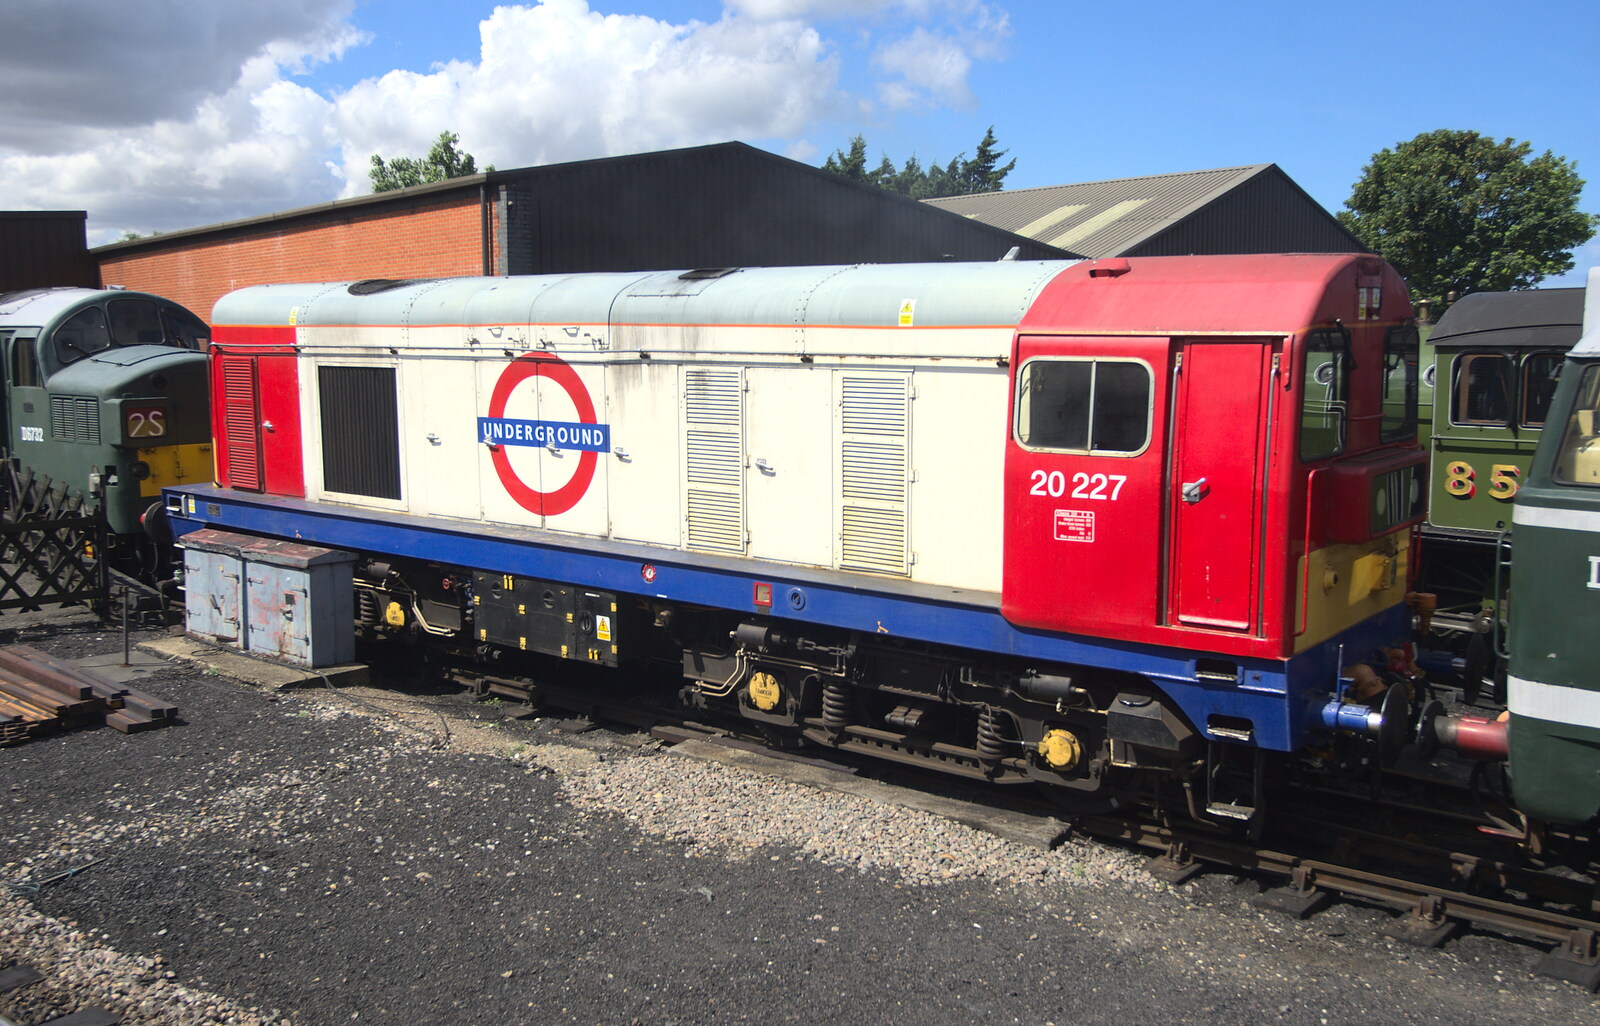 Class 20 20227 in London Underground livery from Sheringham Steam, Sheringham, North Norfolk - 31st July 2016